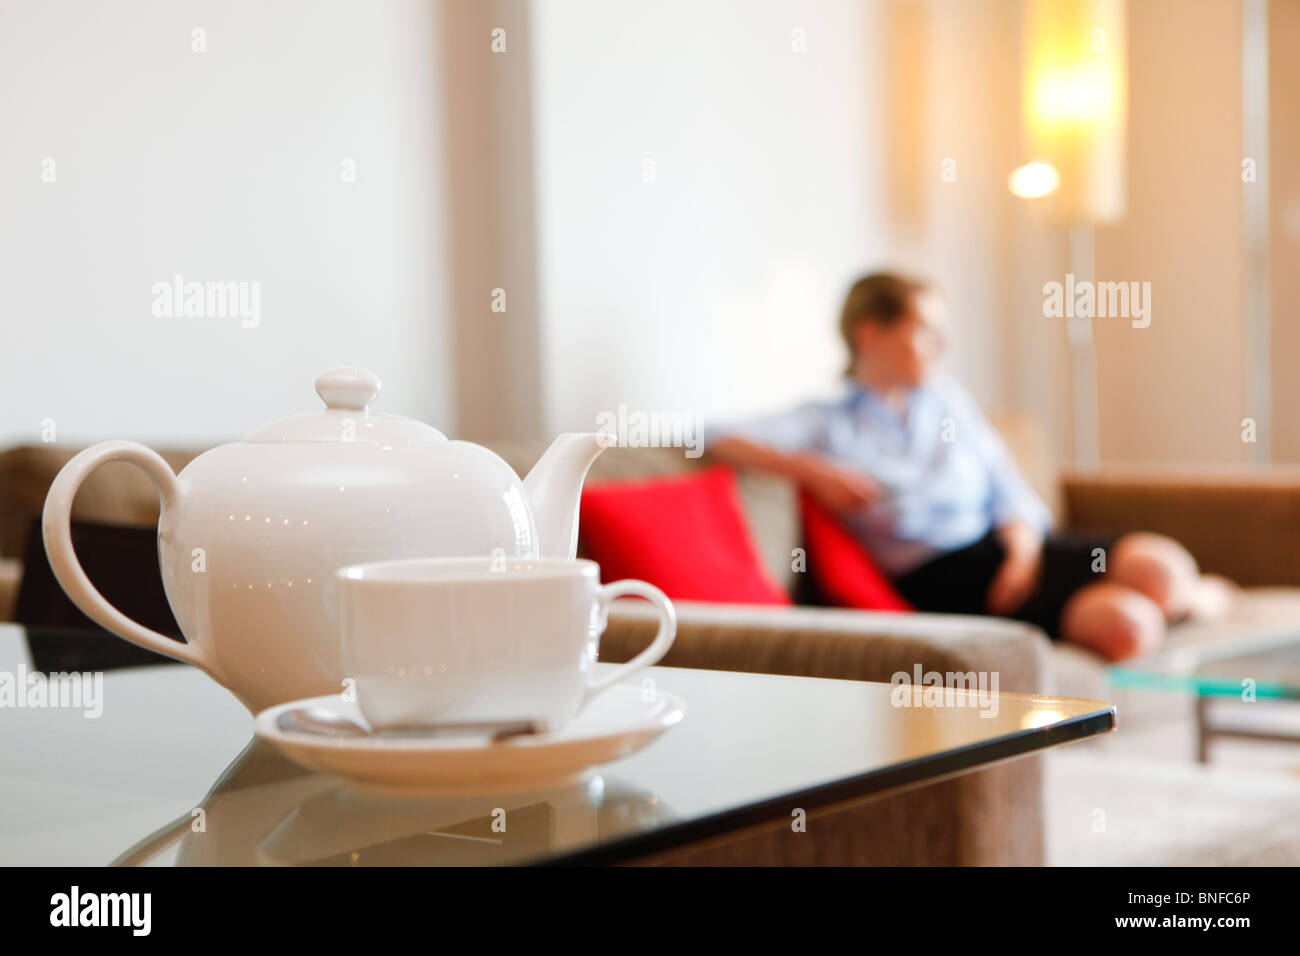 Woman sitting on sofa watching TV in apartments Stock Photo